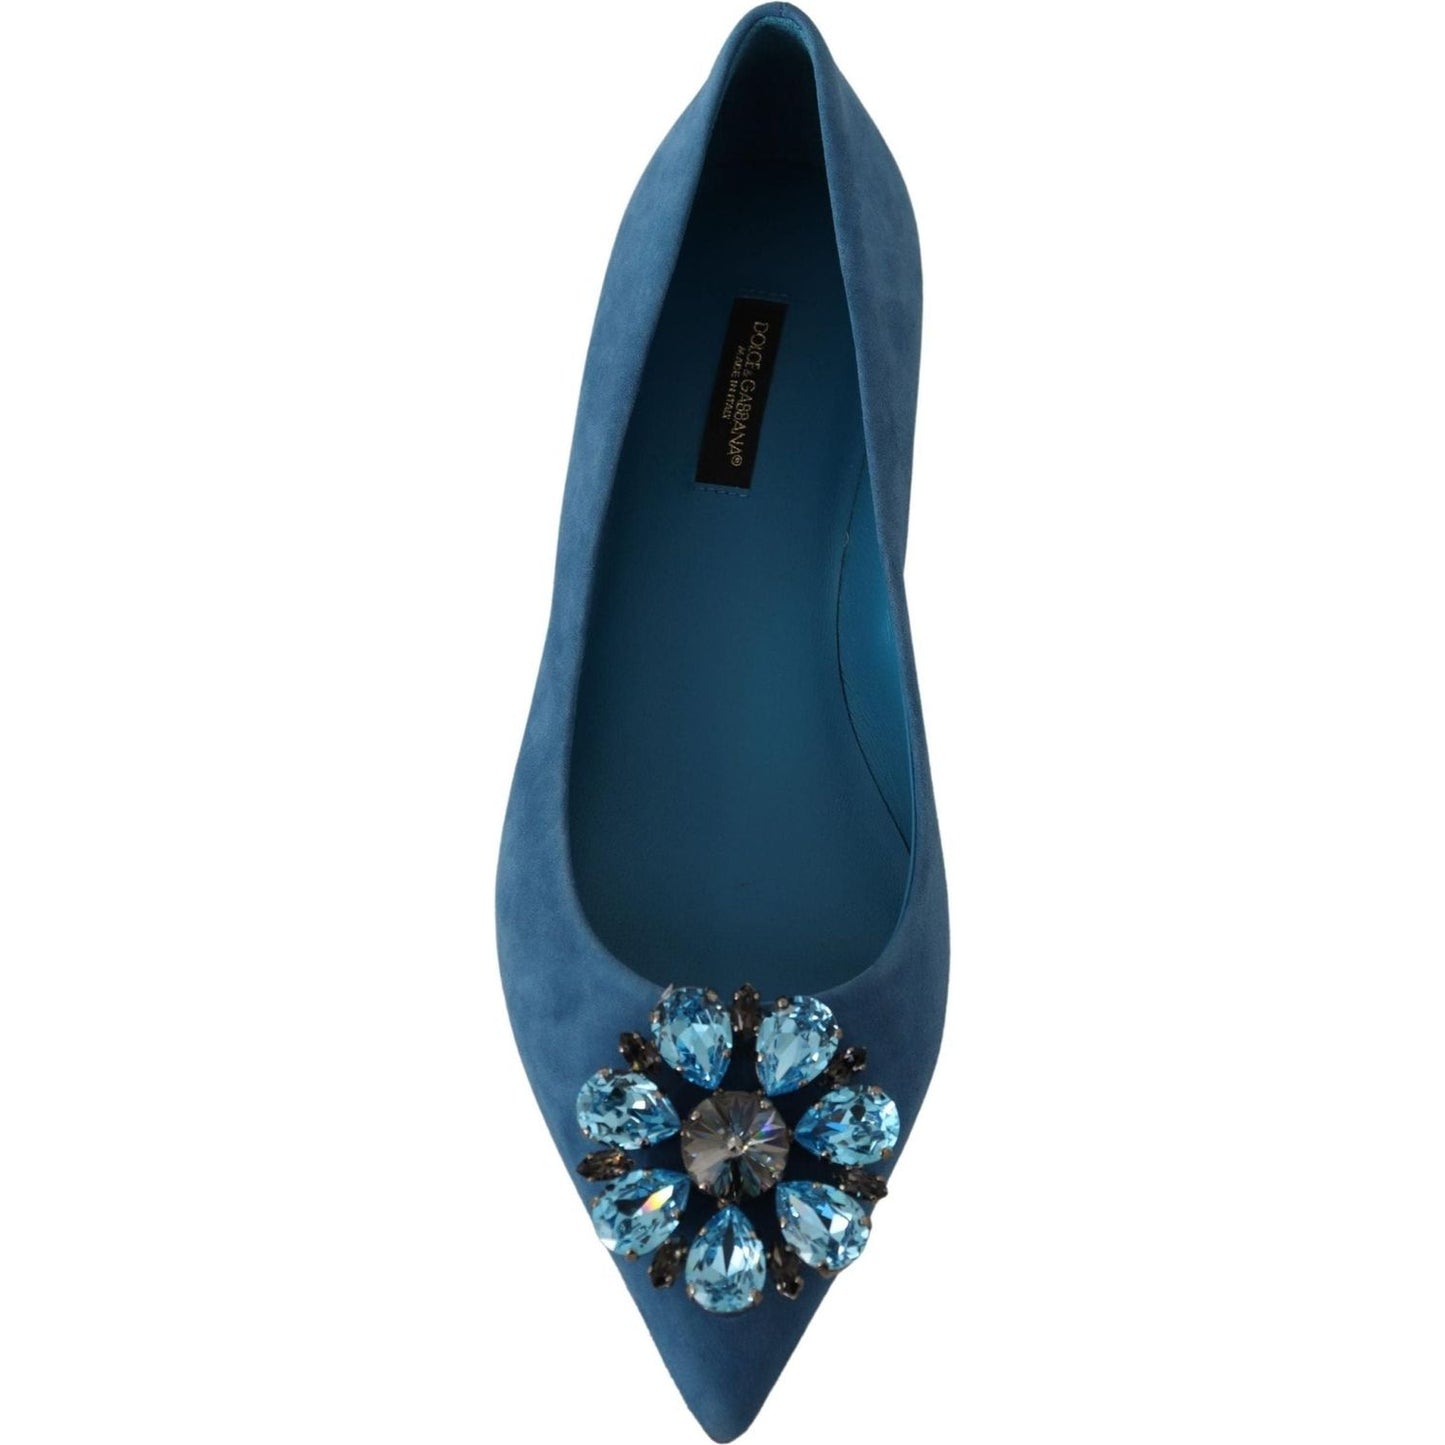 Dolce & Gabbana Elegant Crystal-Embellished Suede Flats blue-suede-crystals-loafers-flats-shoes IMG_5791-scaled-a166b455-324.jpg